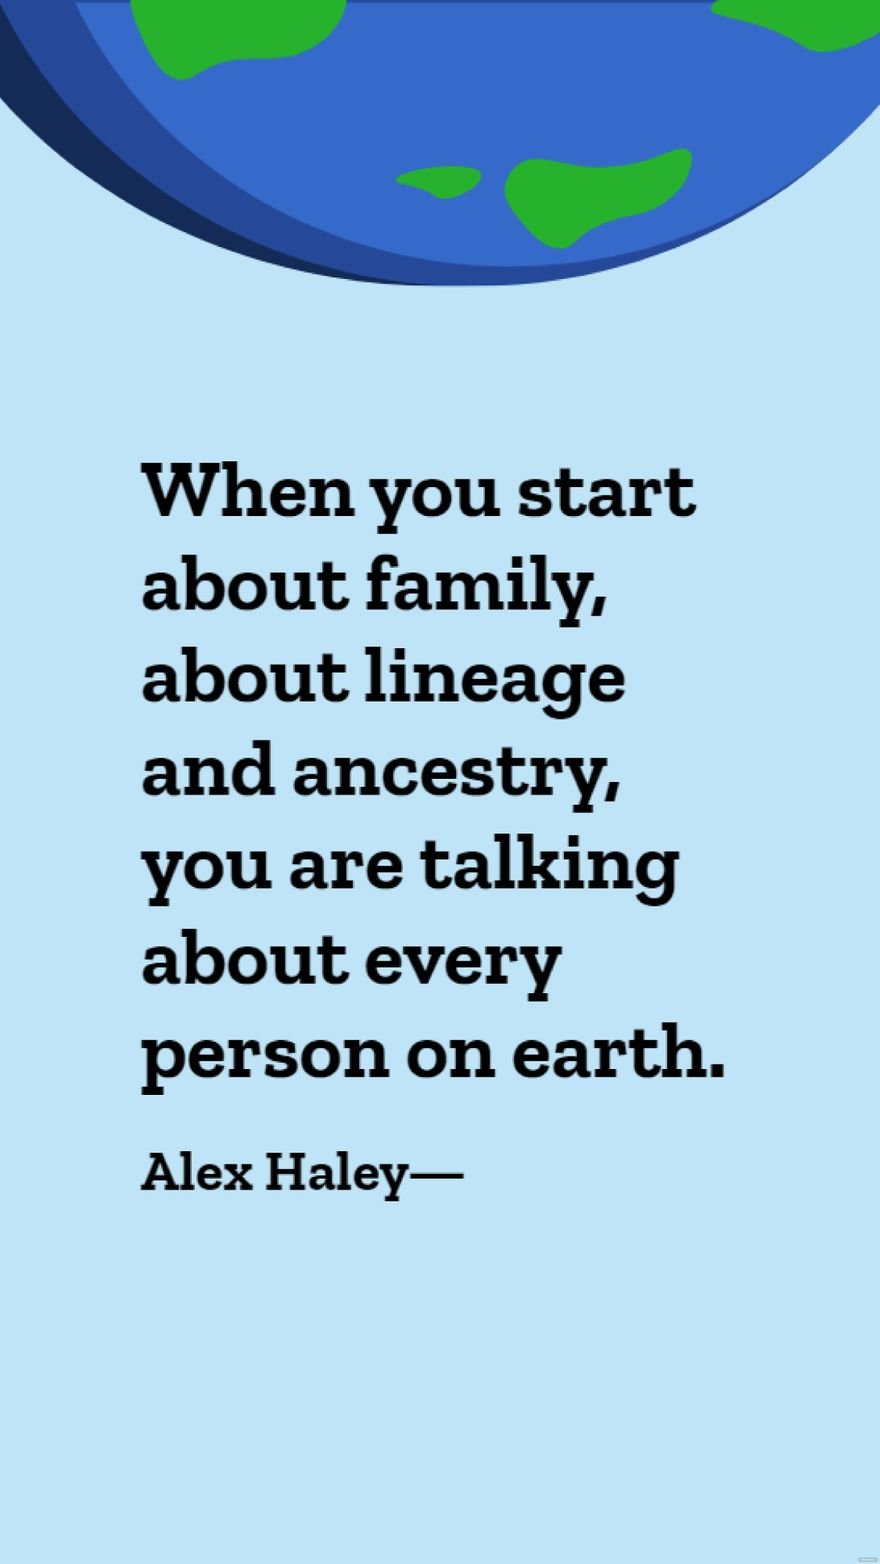 Alex Haley - When you start about family, about lineage and ancestry, you are talking about every person on earth.